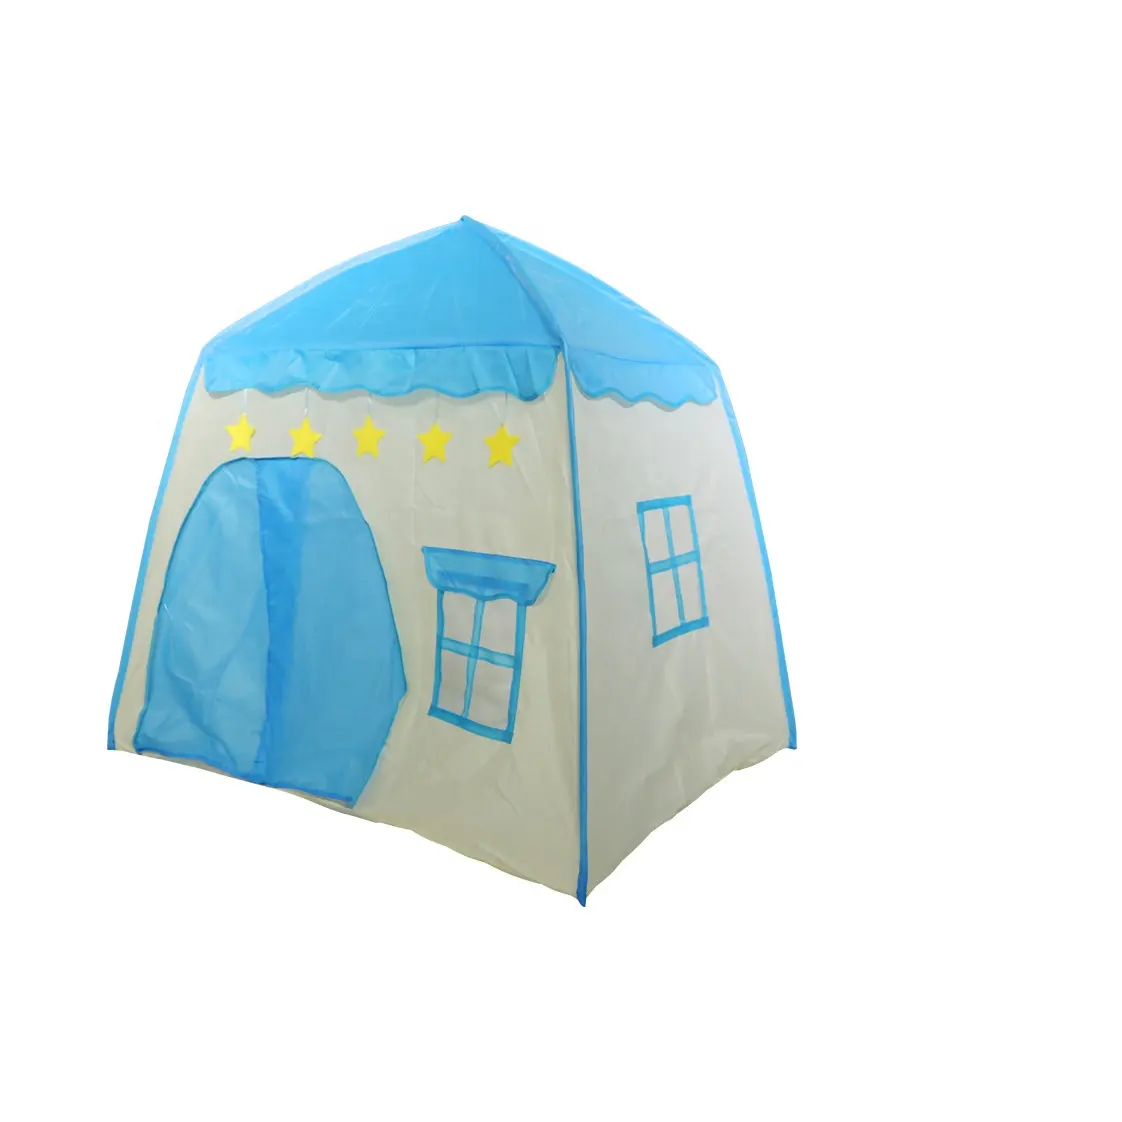 GIBBON Cheap Boy Blue Play Tent Indoor And Outdoor Play Tent Portable Kids Play House Tent Wholesale